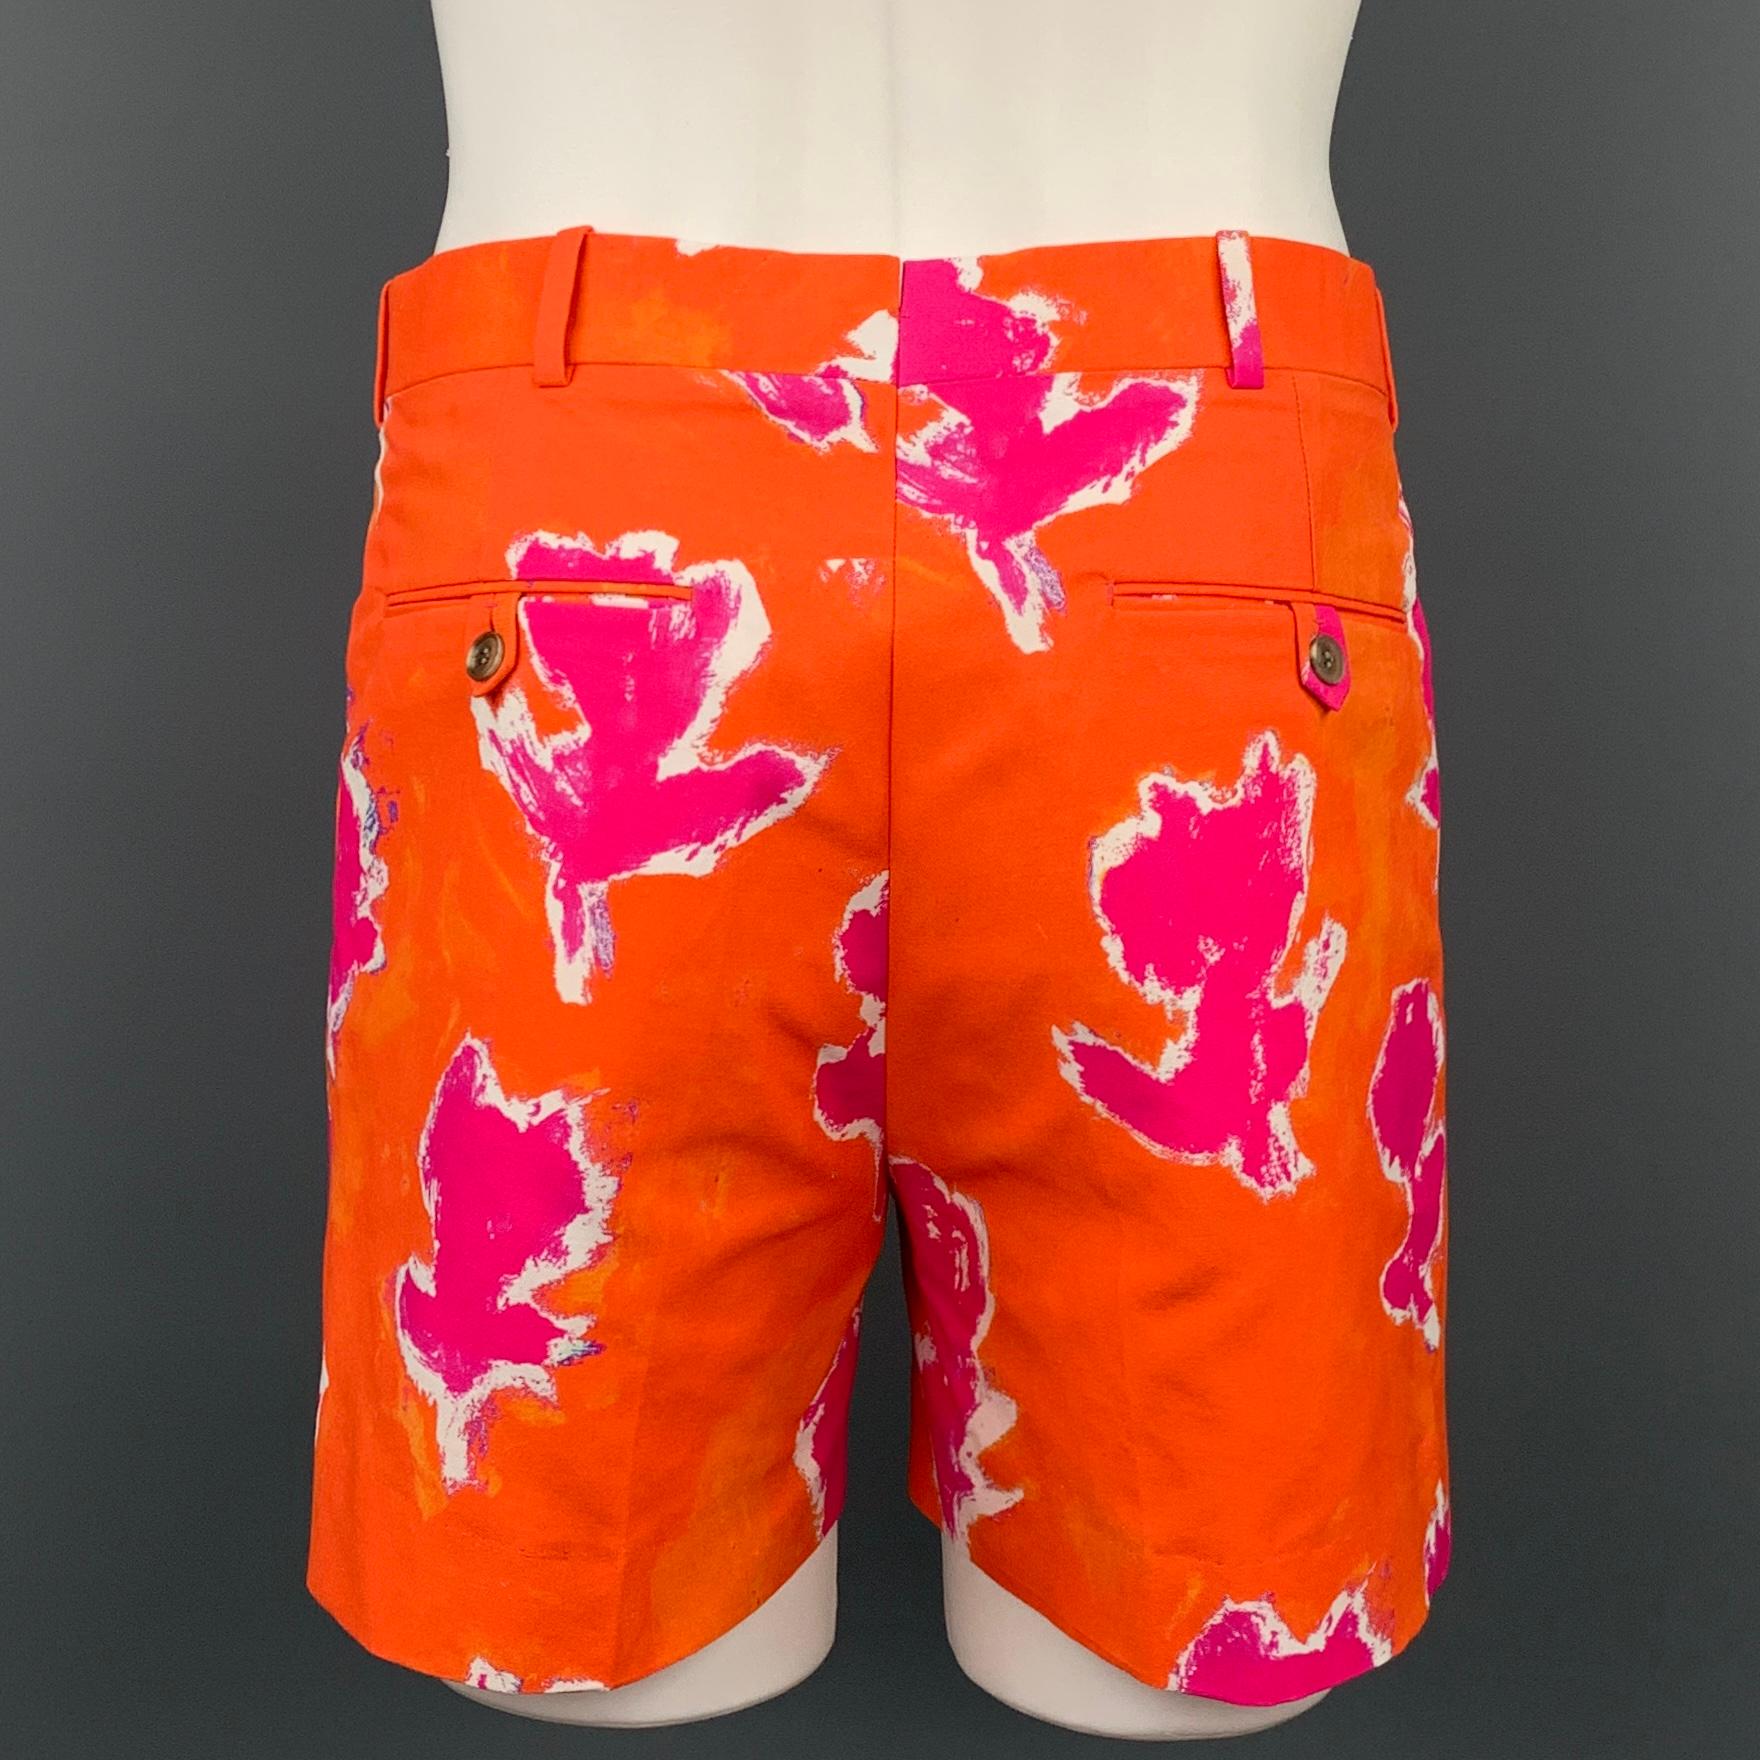 PRABAL GURUNG shorts comes in a orange & fuchsia cotton / polyamide featuring front pleats, slit pockets, front tab, and a zip fly closure. 

New With Tags. 
Marked: 32
Original Retail Price: $695.00

Measurements:

Waist: 33 in.
Rise: 11